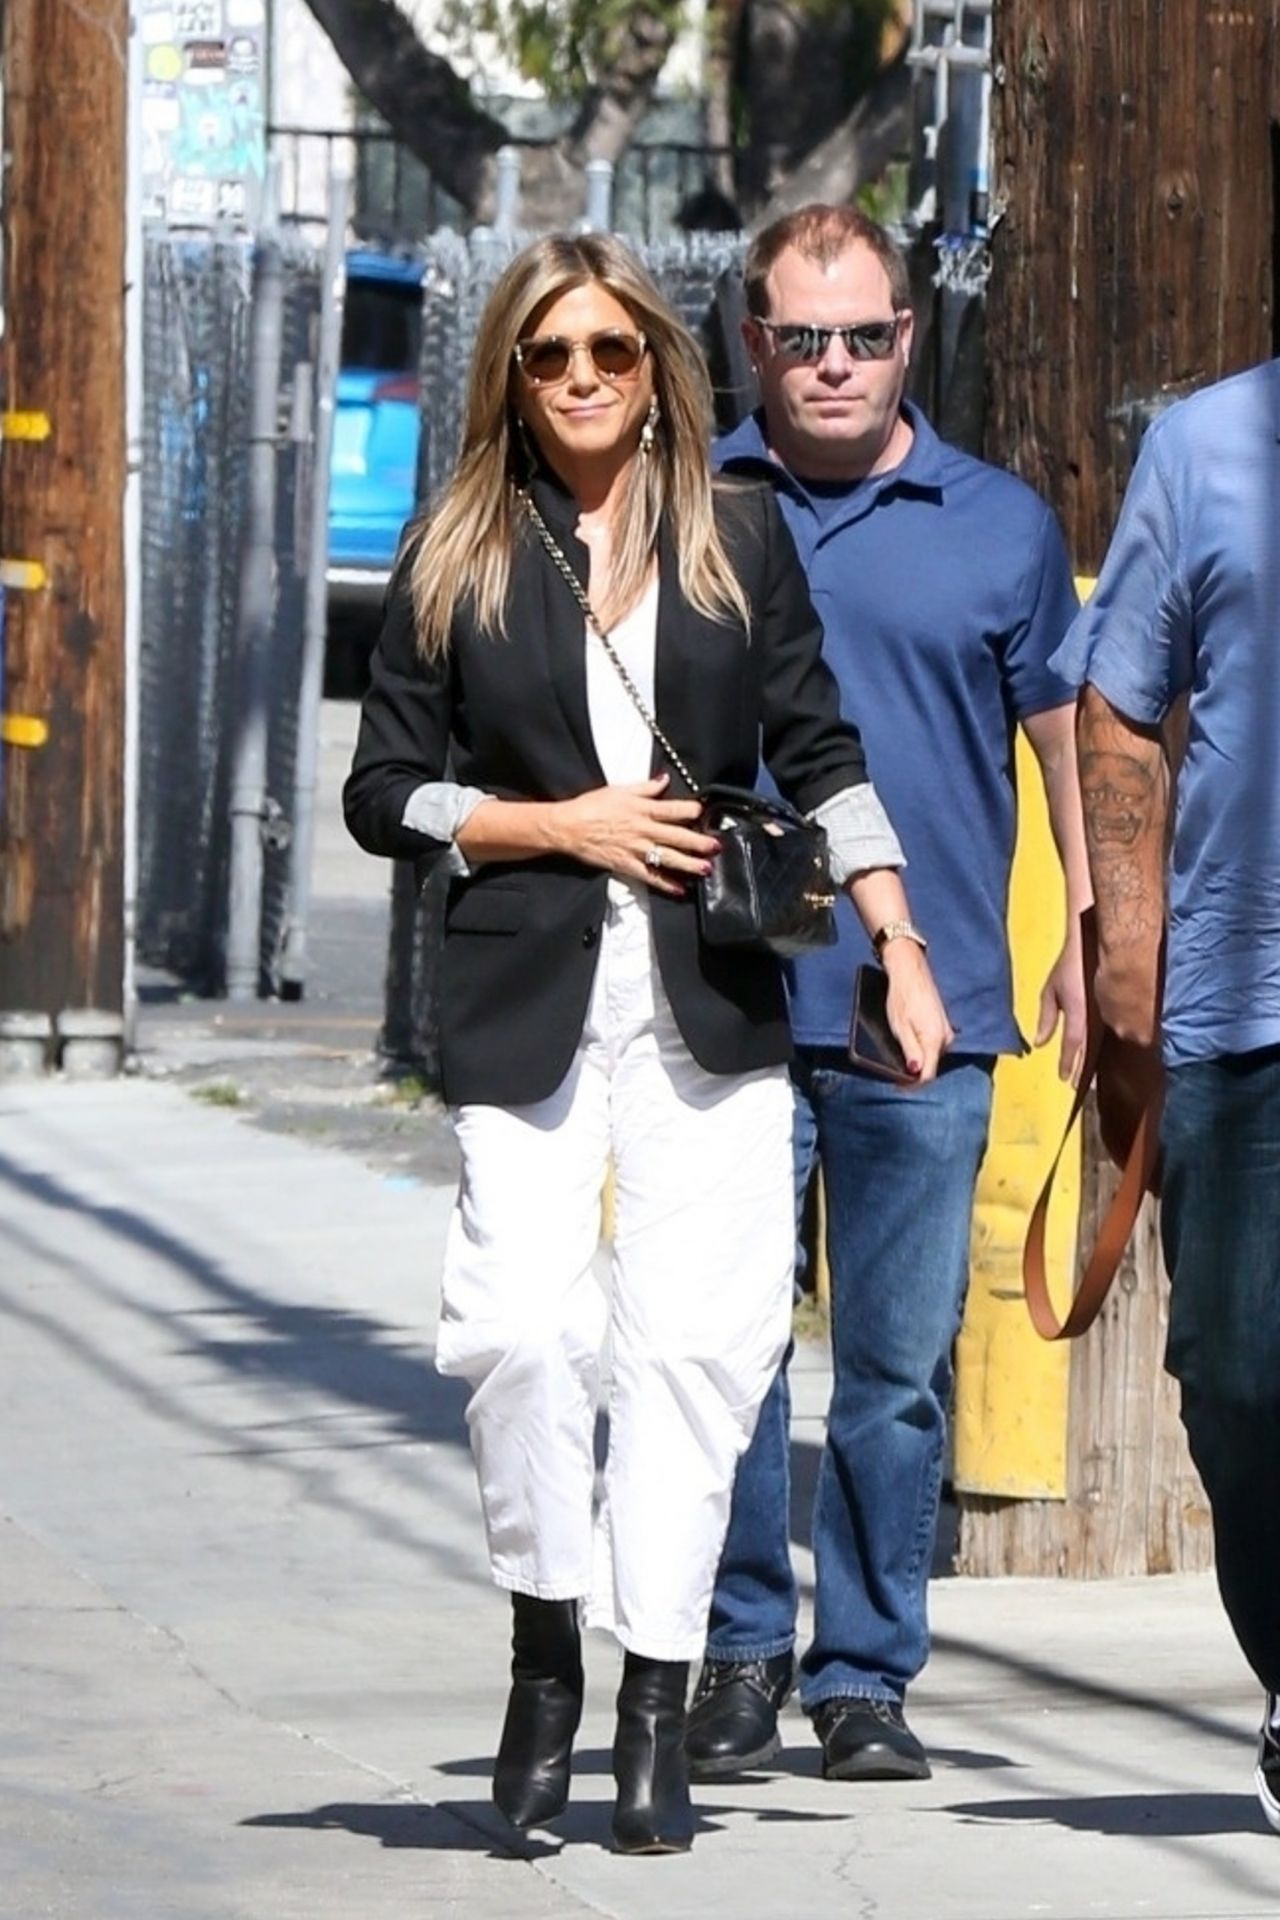 jennifer-aniston-arriving-to-appear-on-jimmy-kimmel-live-in-hollywood-05-29-2019-3.jpg